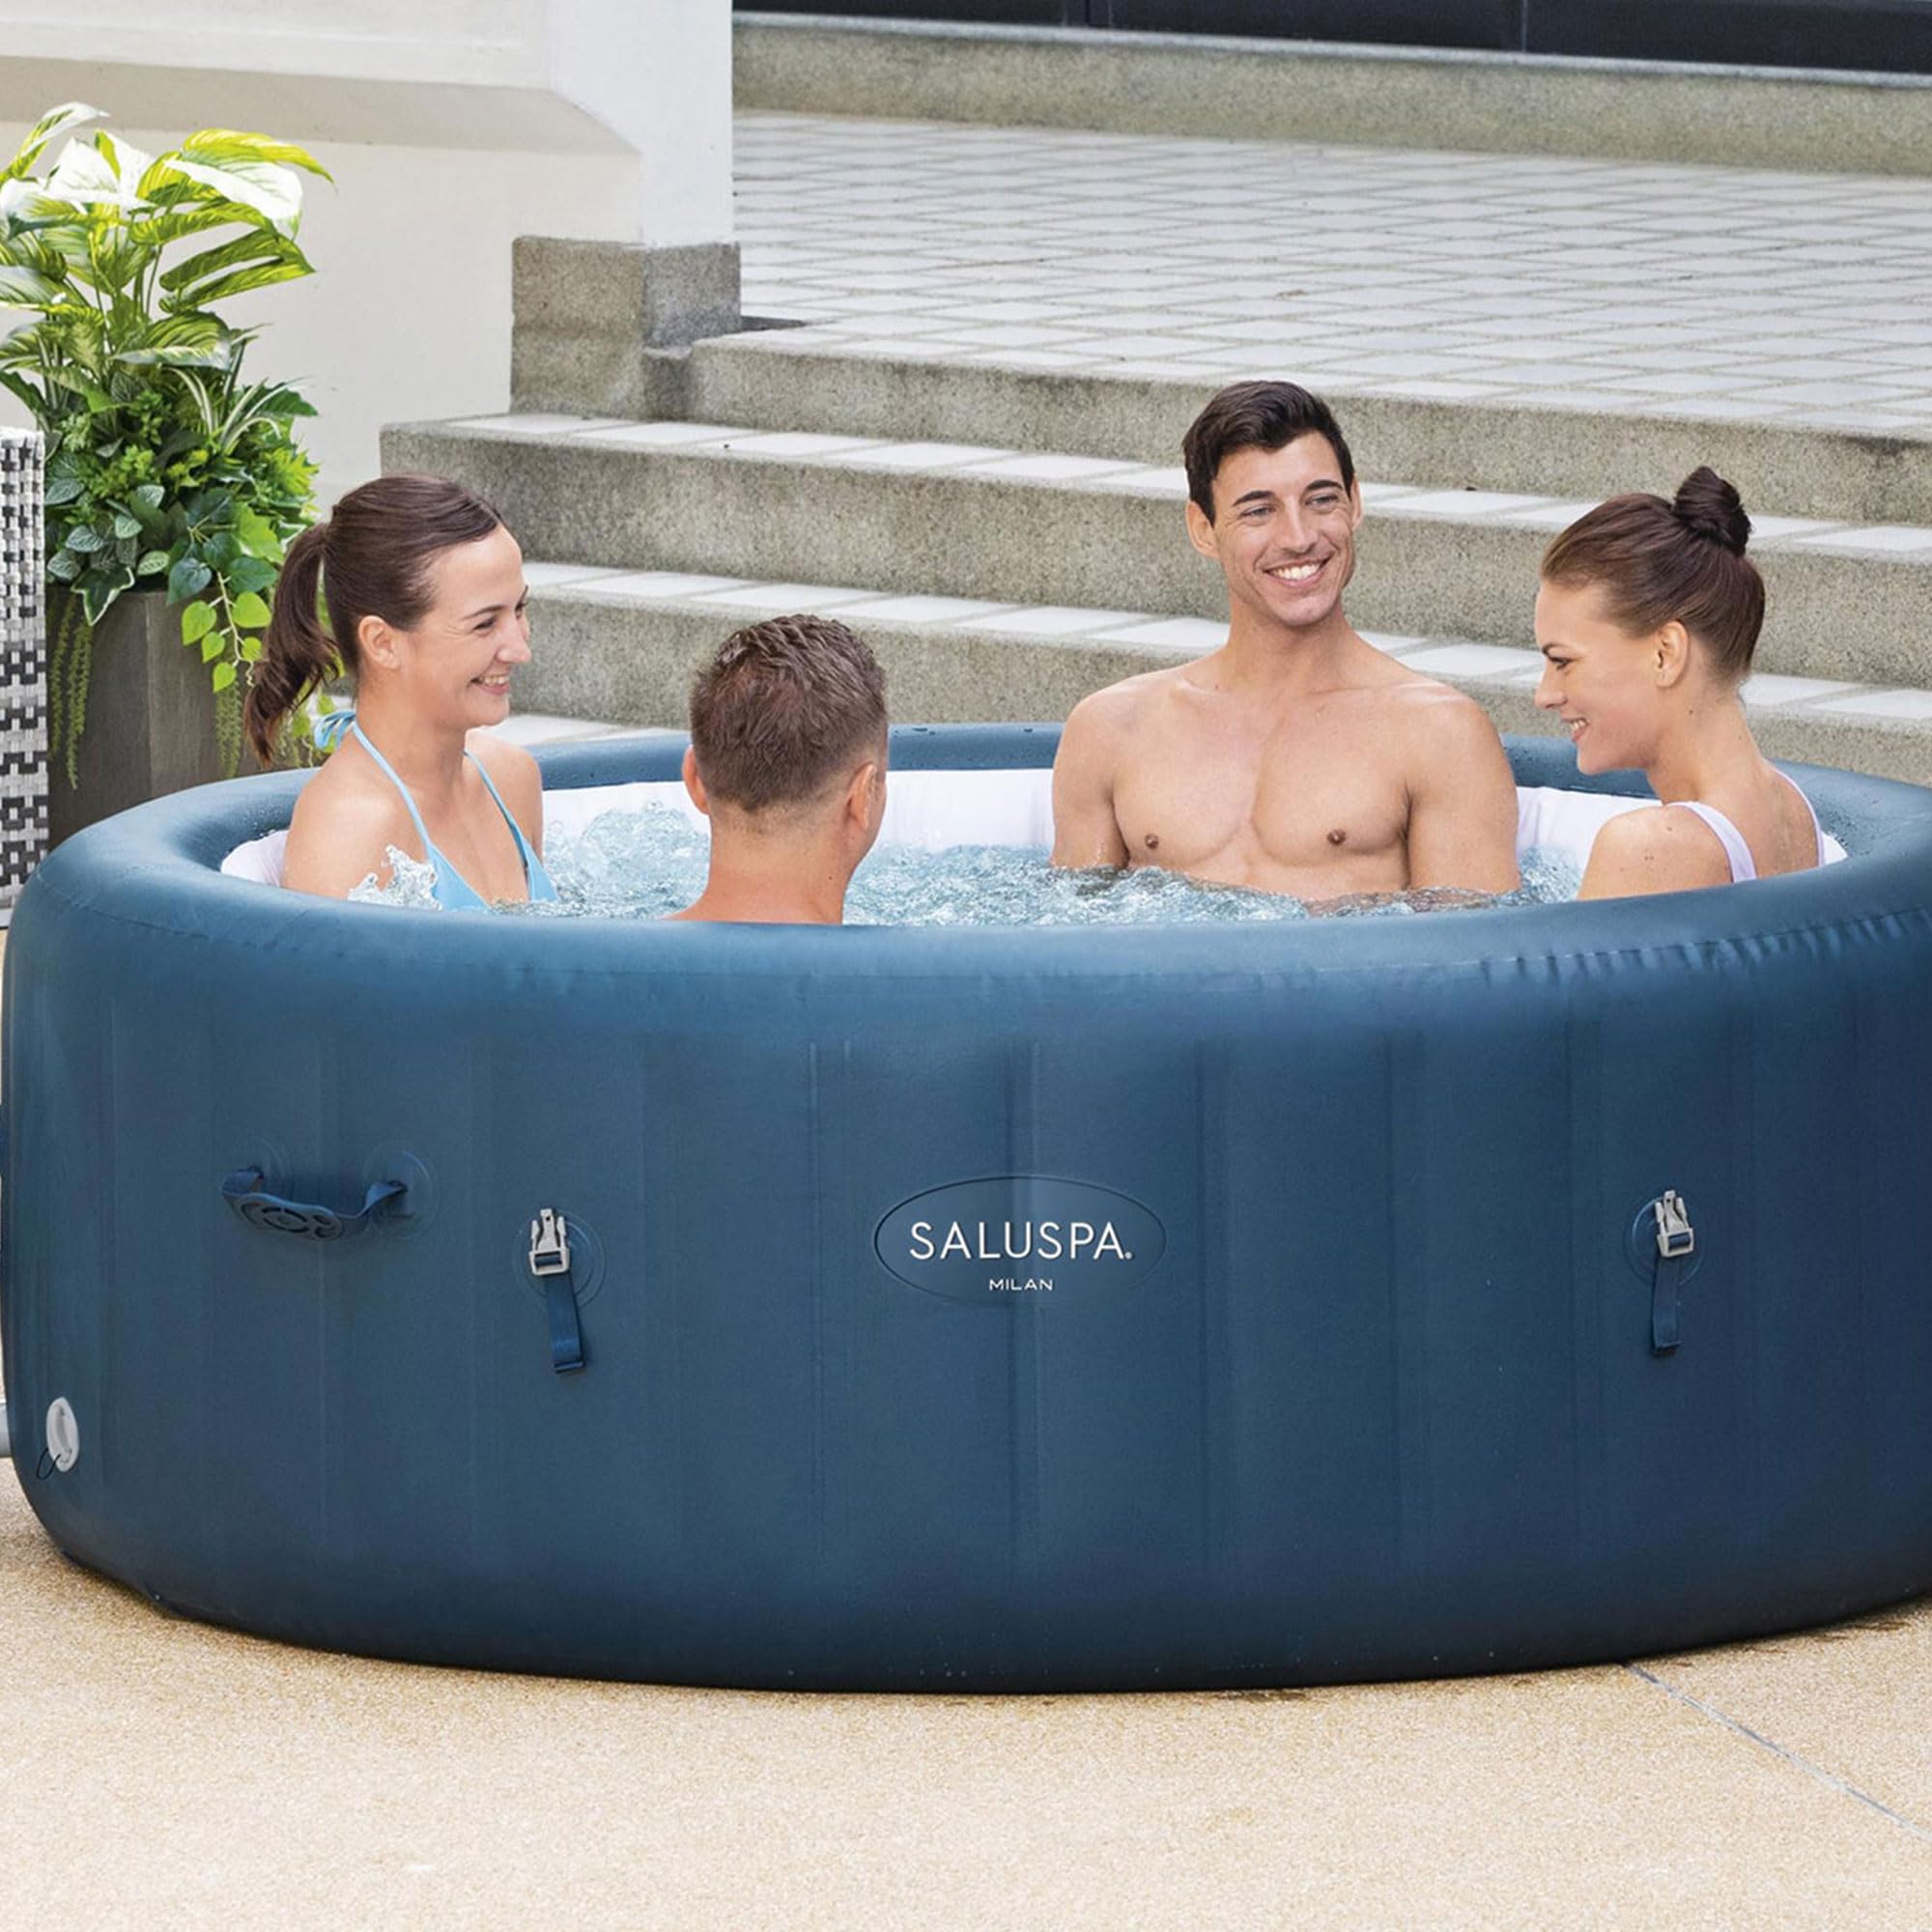 Bestway SaluSpa Milan AirJet Inflatable Hot Tub with 140 Soothing AirJets and 4-Pack of SaluSpa Underwater Non-Slip Spa Seat with Adjustable Legs